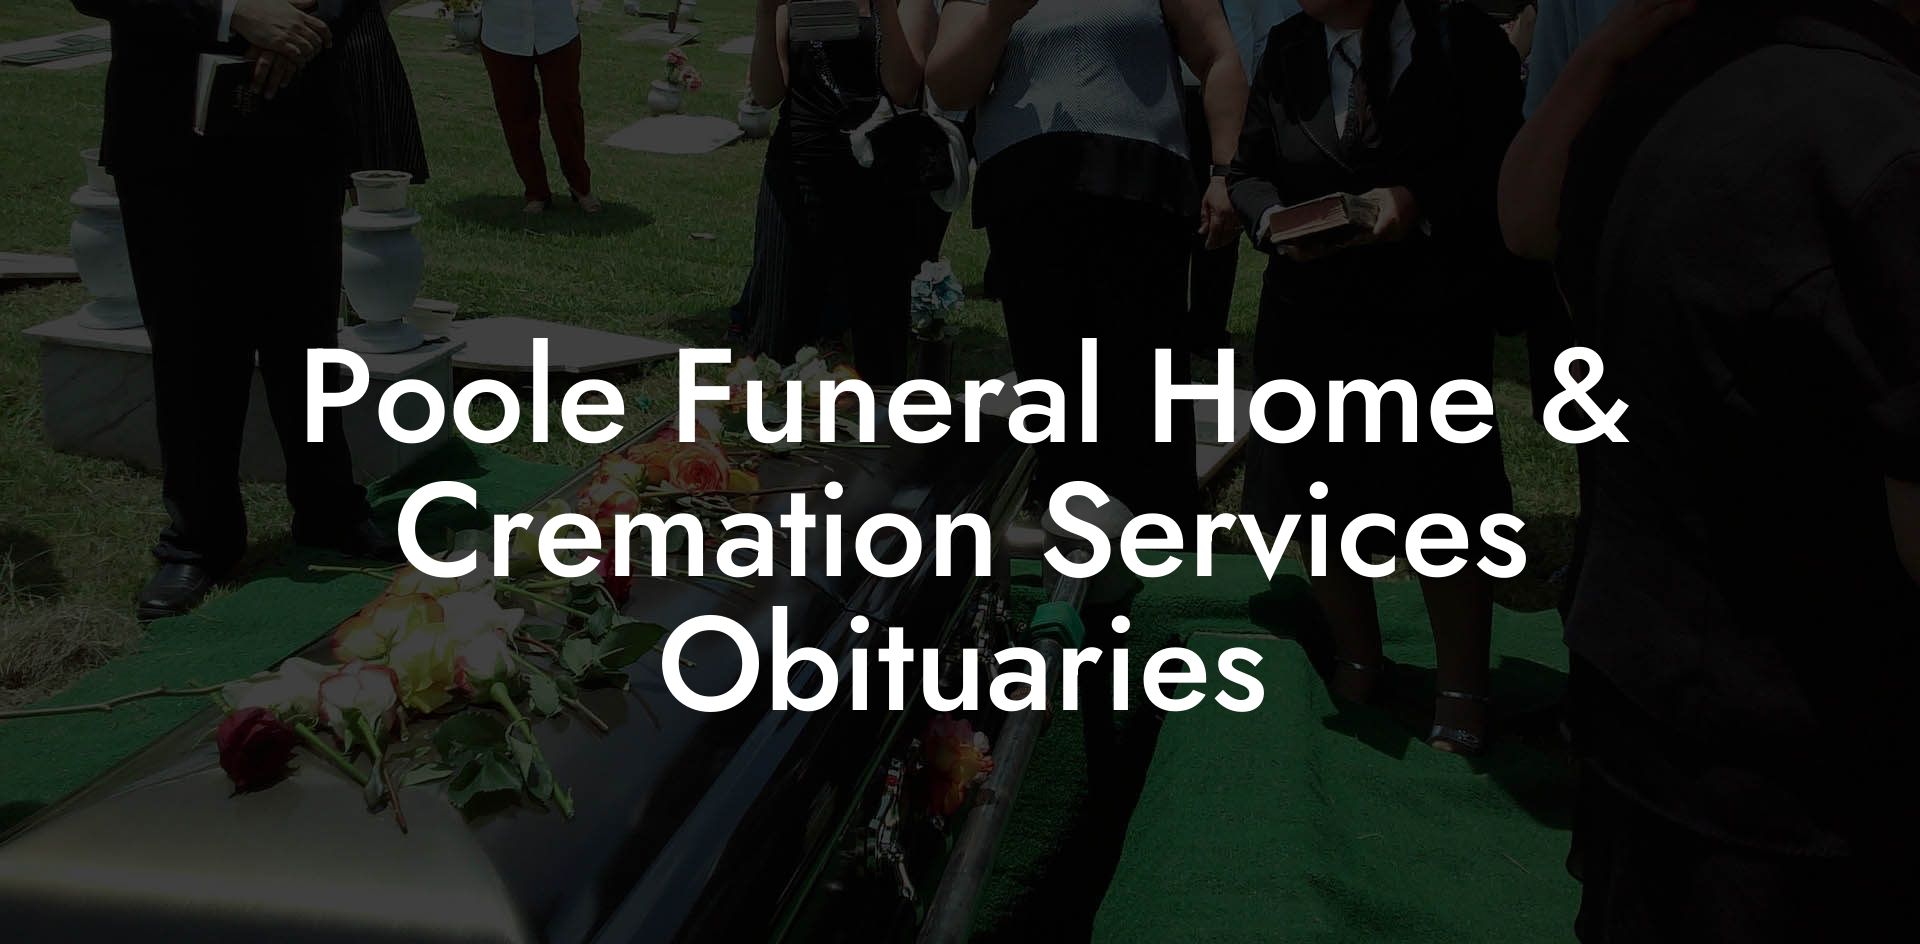 Poole Funeral Home & Cremation Services Obituaries